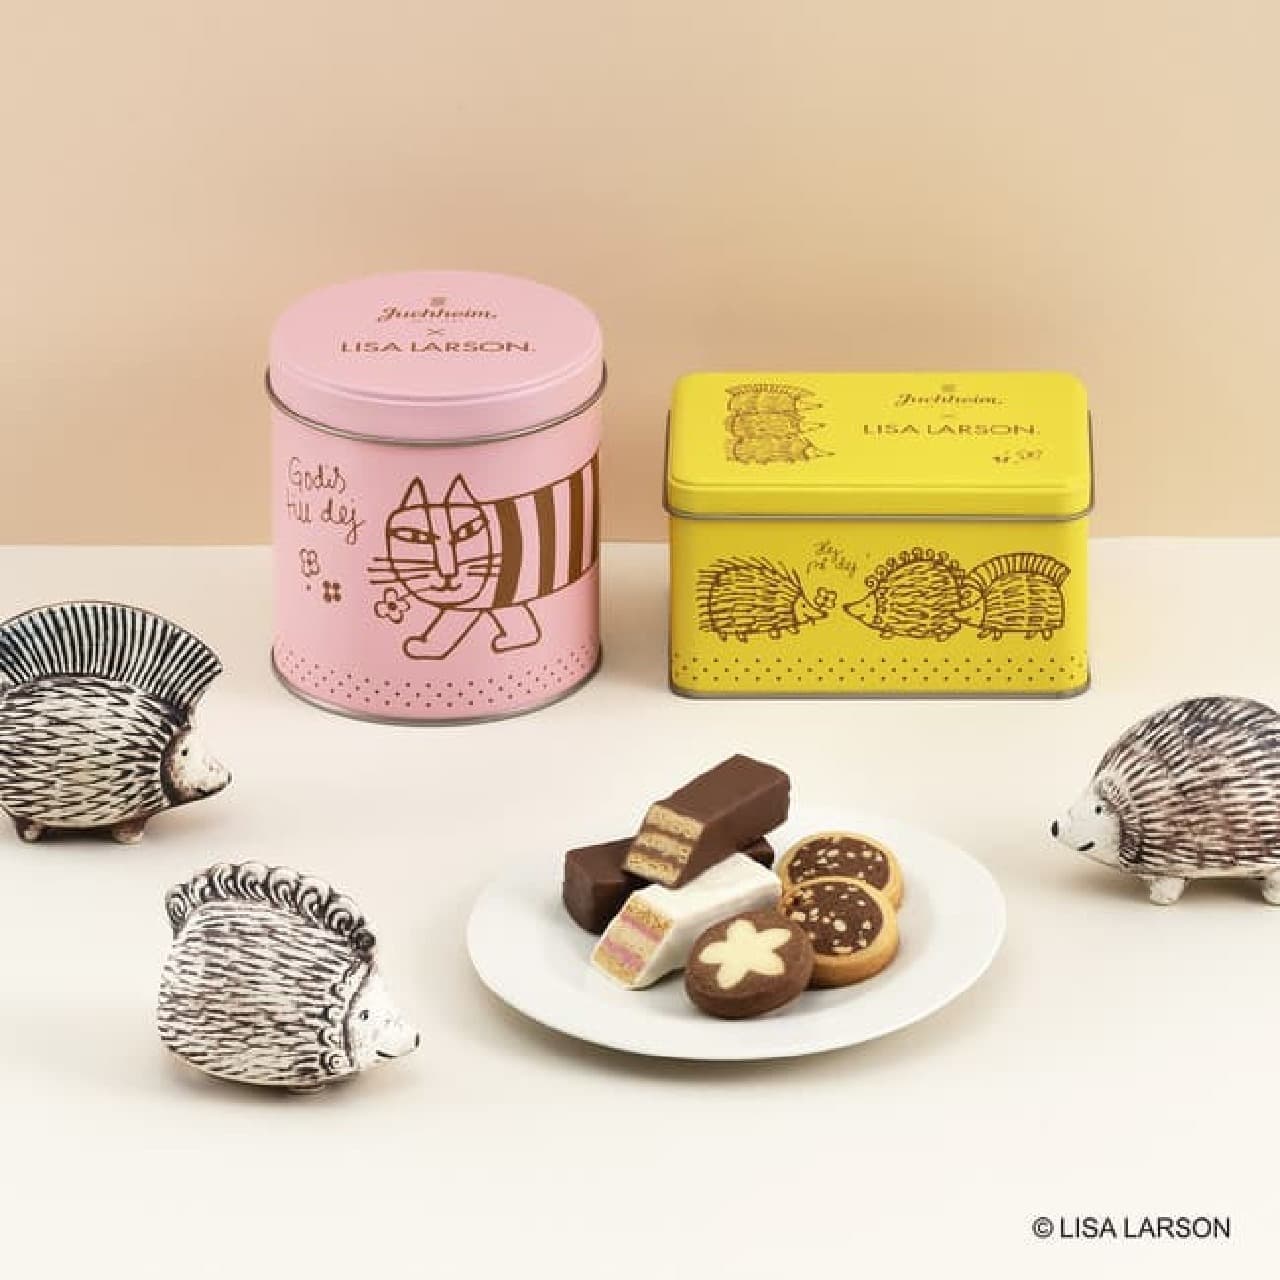 Juchheim x Lisa Larson again this year! Biscuits in Mikey cans, assorted pouches, millefeuilles, etc.